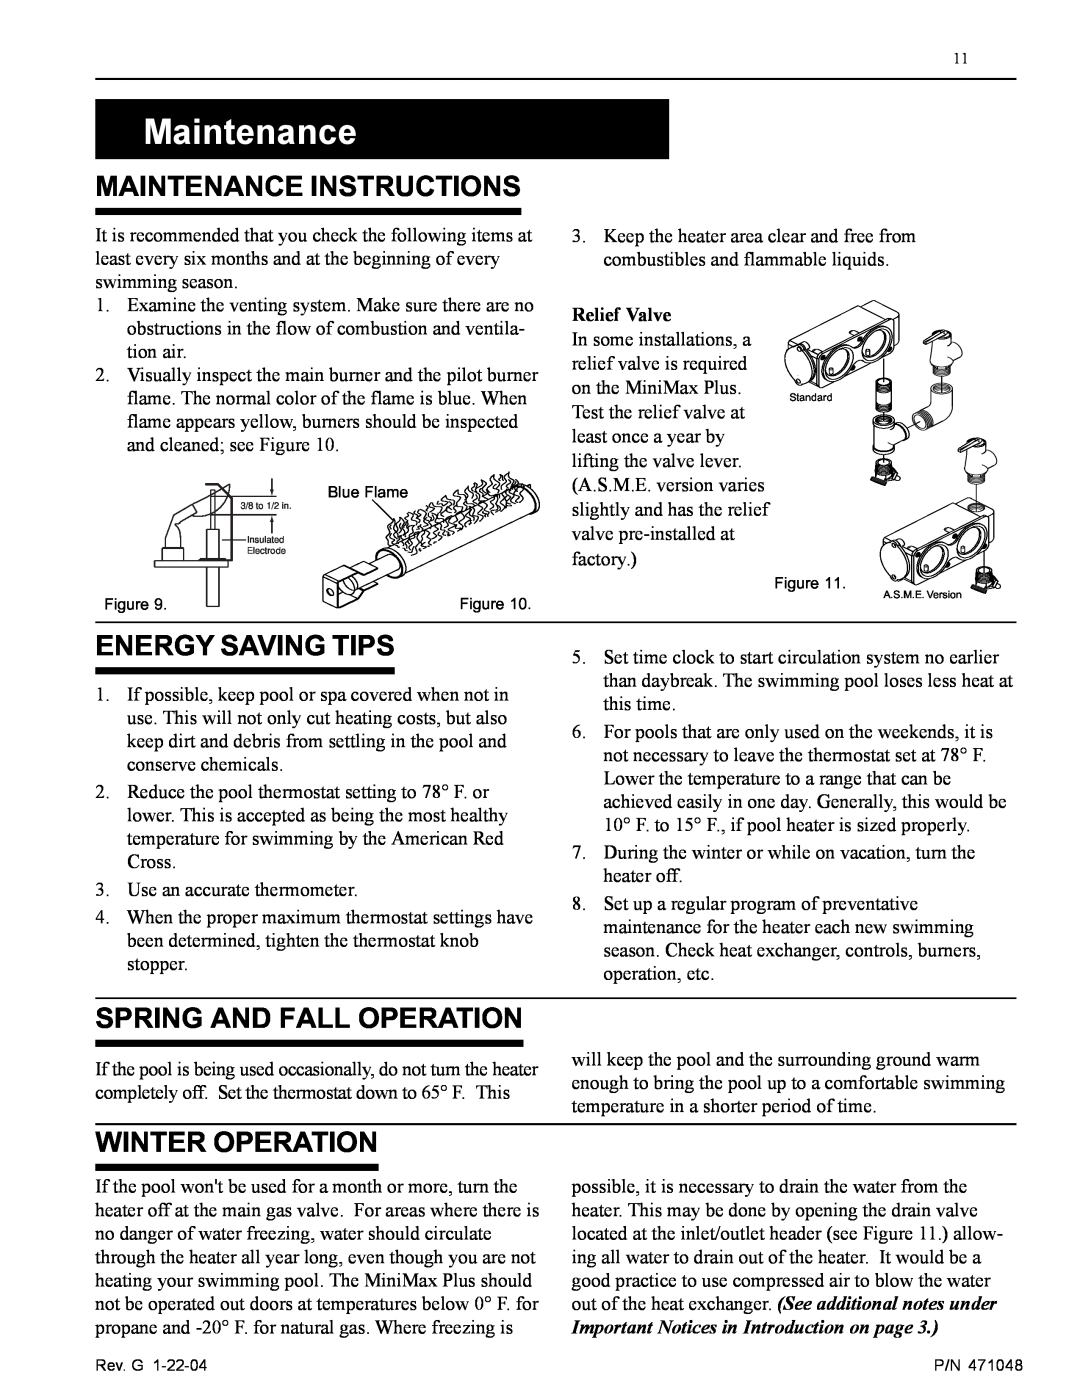 Pentair 100 Maintenance Instructions, Energy Saving Tips, Spring And Fall Operation, Winter Operation, Relief Valve 